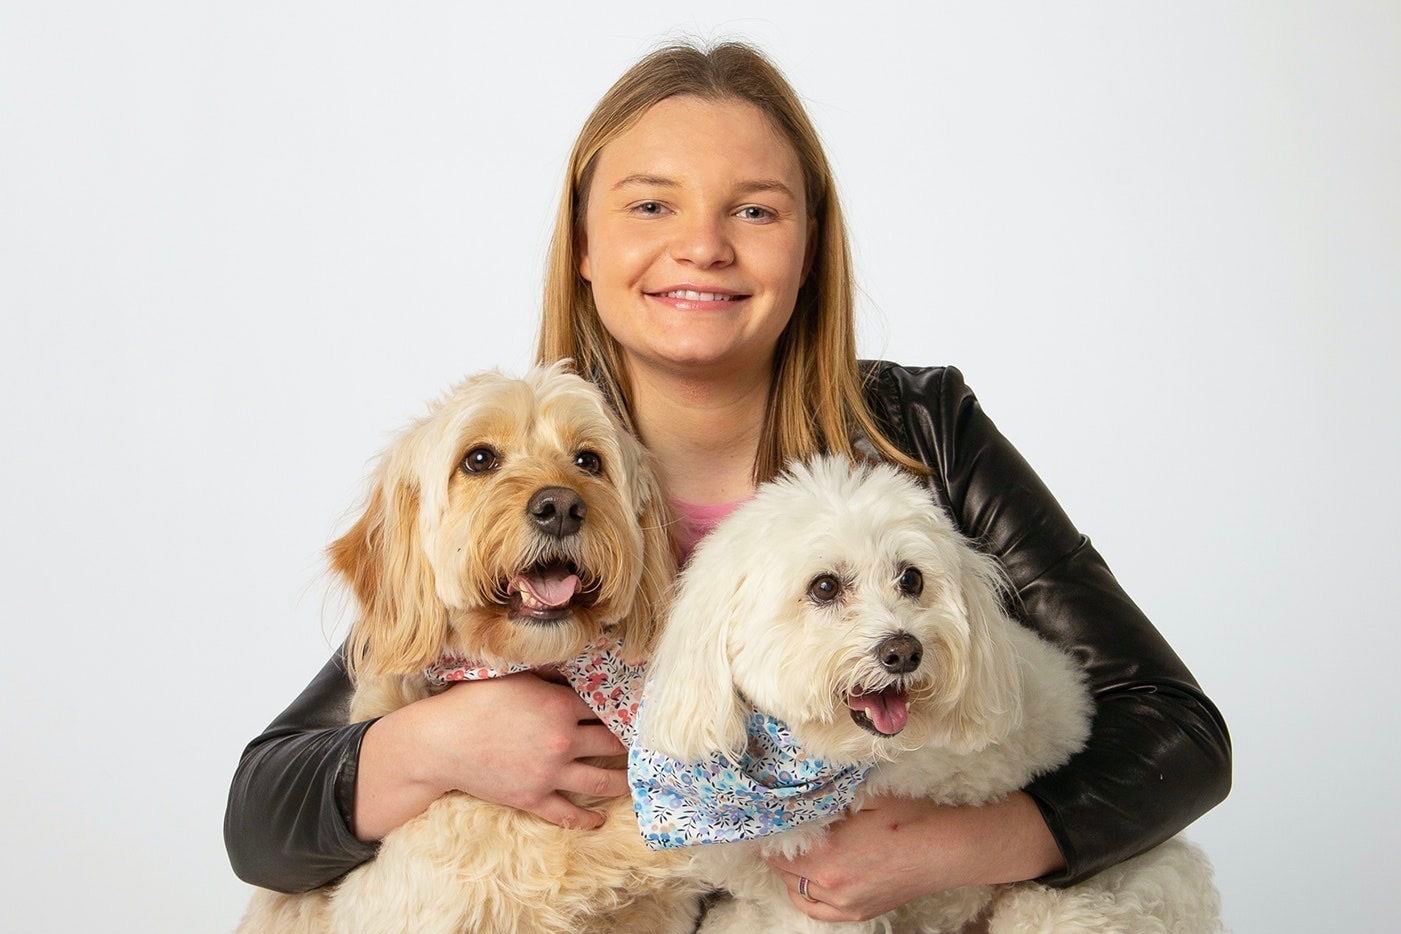 Gracie Dix, an 18-year-old author from Dallas, snuggles her dogs Sandy and Snowball. Snowball inspired one of the characters in her debut novel, "Welcome to Superhero School."